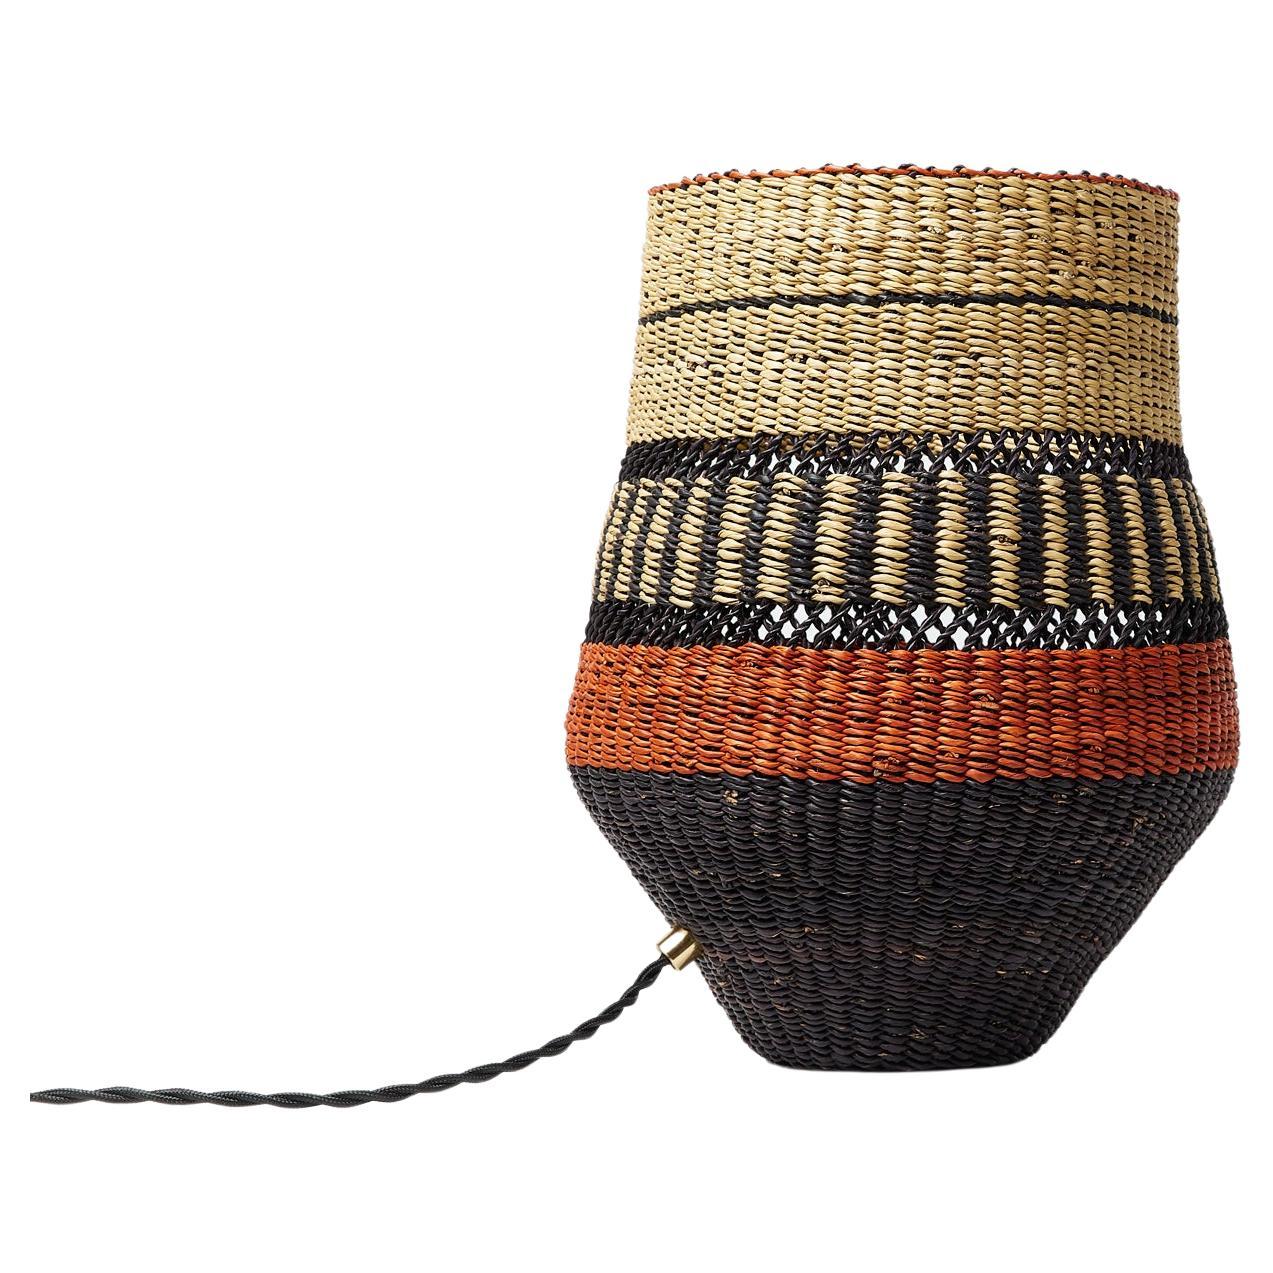 Contemporary Ethnic Handwoven Straw Basket Lamp Natural Terracotta Red and black